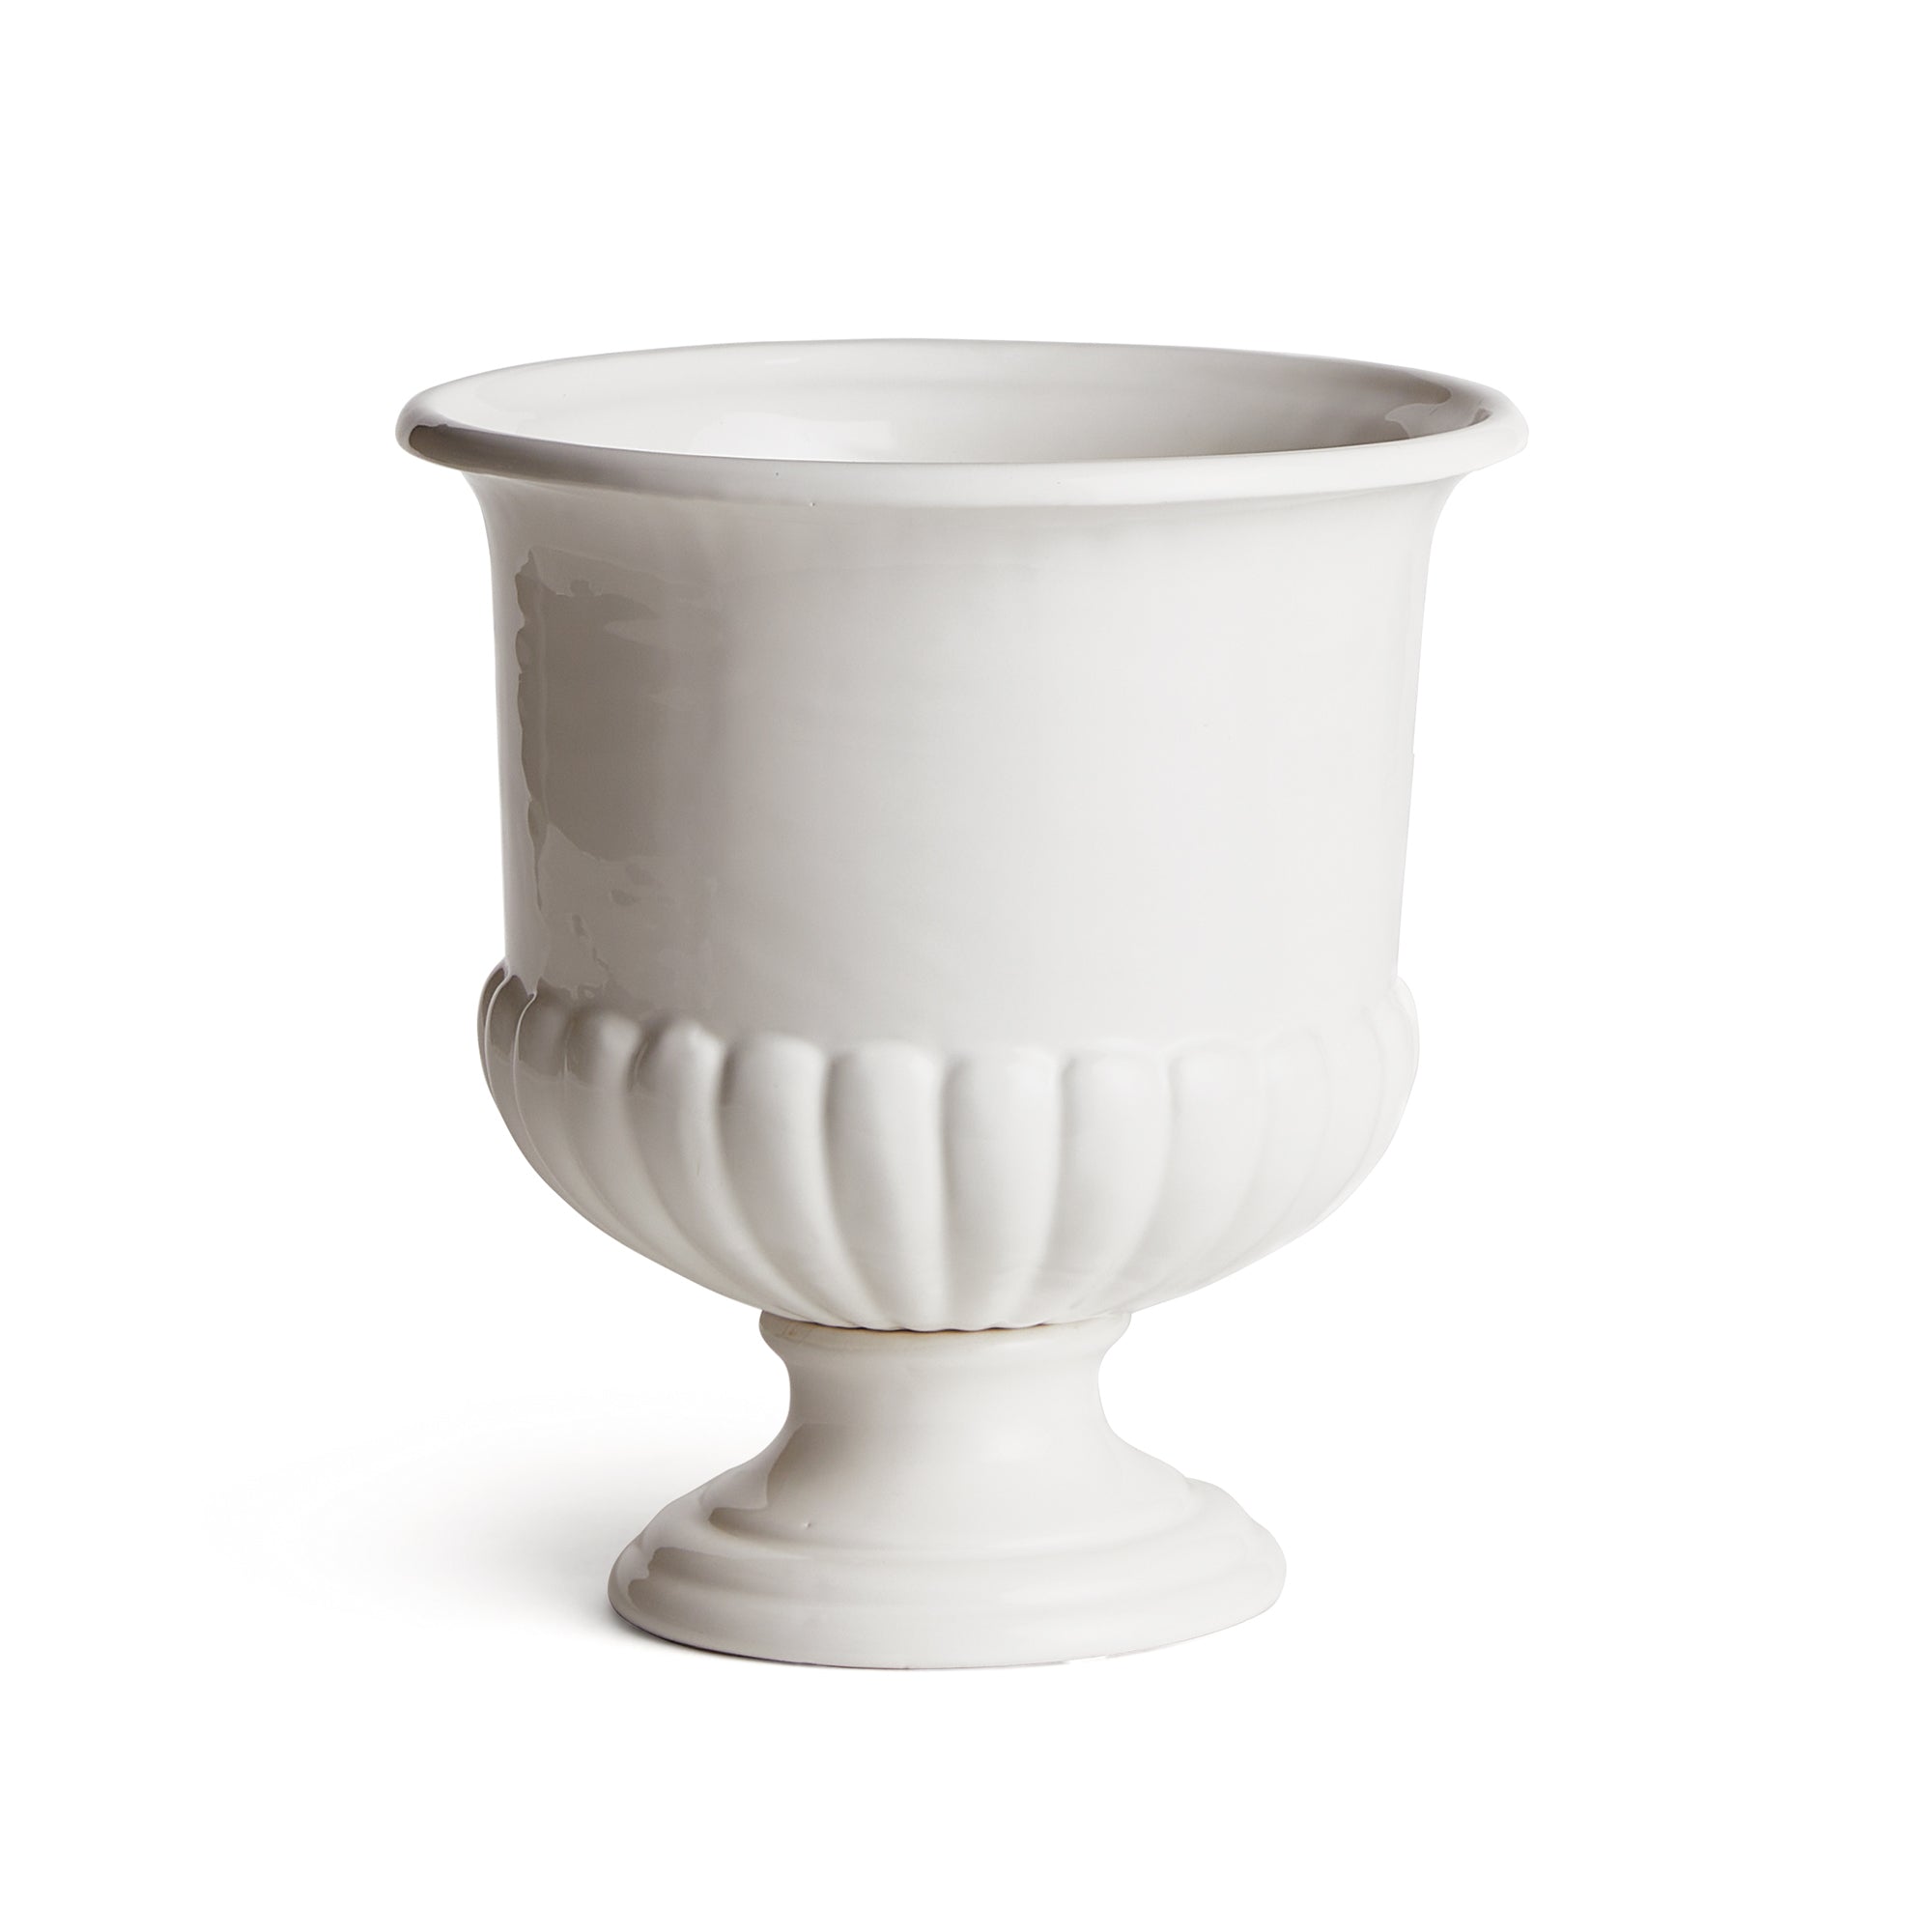 A real statement piece. The Mirabelle Pedestal Bowl is made in classic Italian style. A beautiful addition to any traditional to transitional space. Amethyst Home provides interior design, new construction, custom furniture, and area rugs in the Dallas metro area.